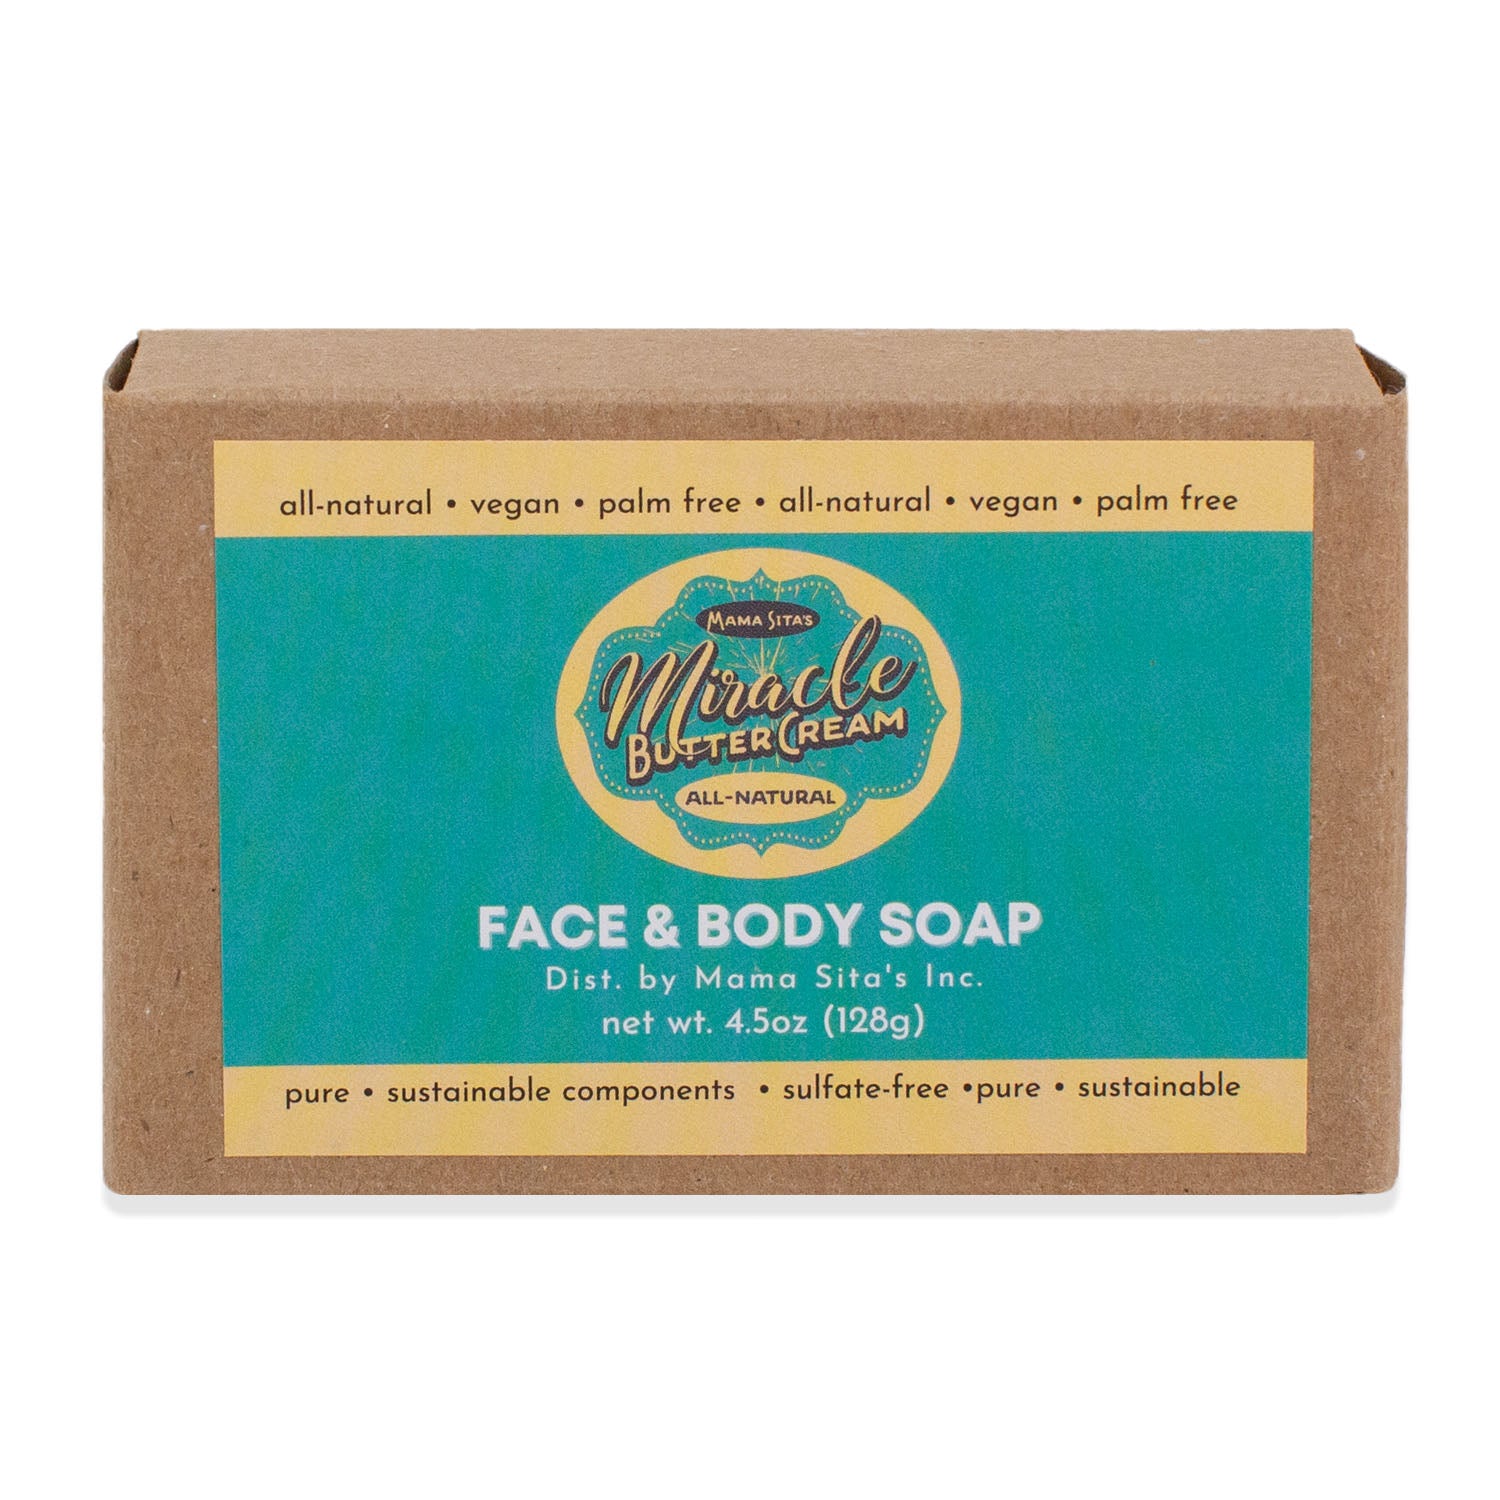 Miracle Butter Cream Facial &amp; Body Soap Box front, miraclebuttercream.com